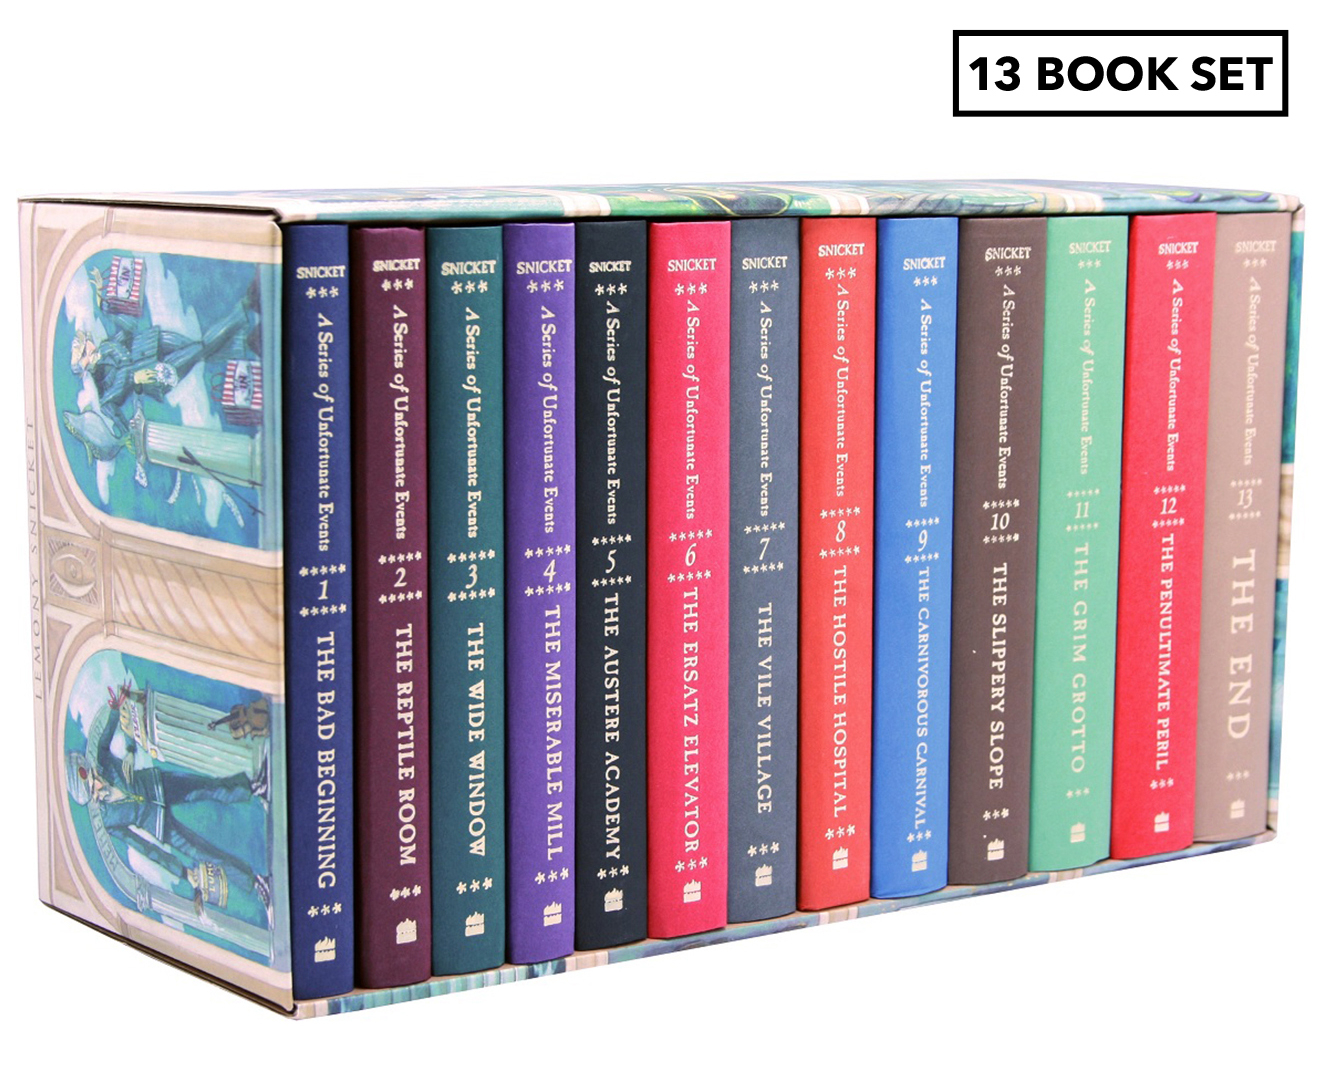 Lemony Snicket's A Series of Unfortunate Events 13Book Box Set Www